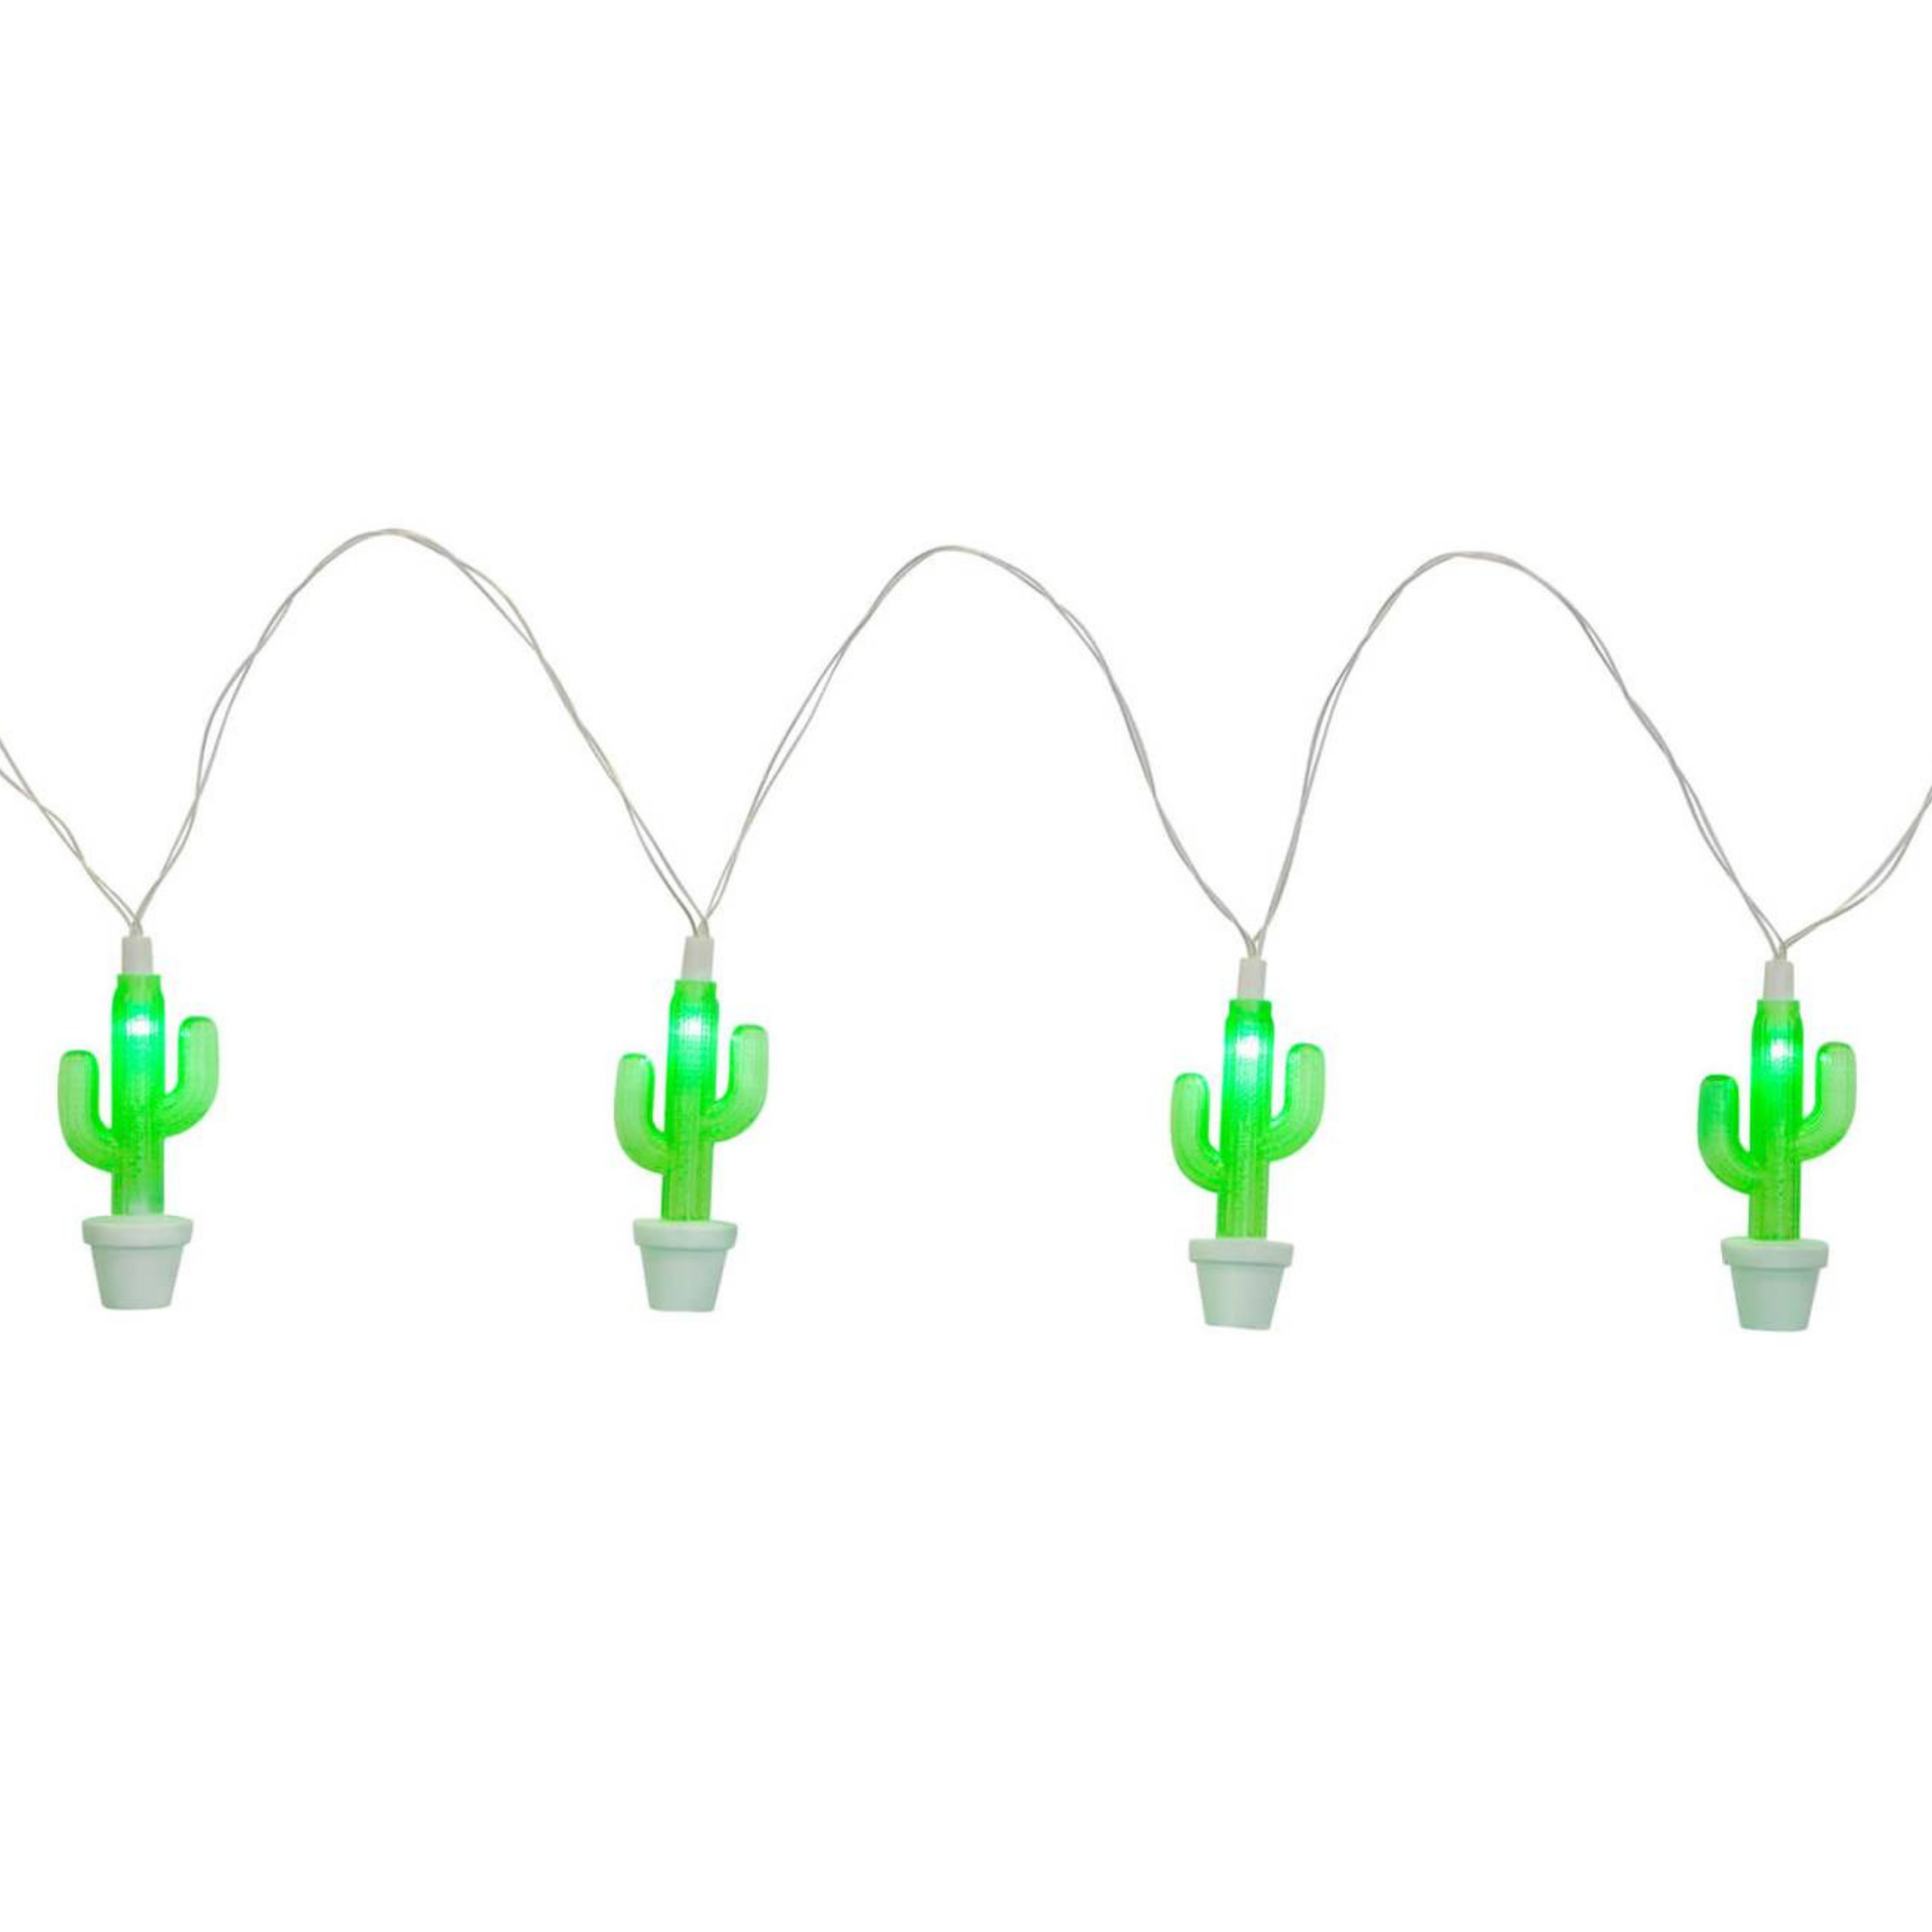 String lights that are shaped like green cacti in white pots, strung together by white string. These light are pictured on a white background. 